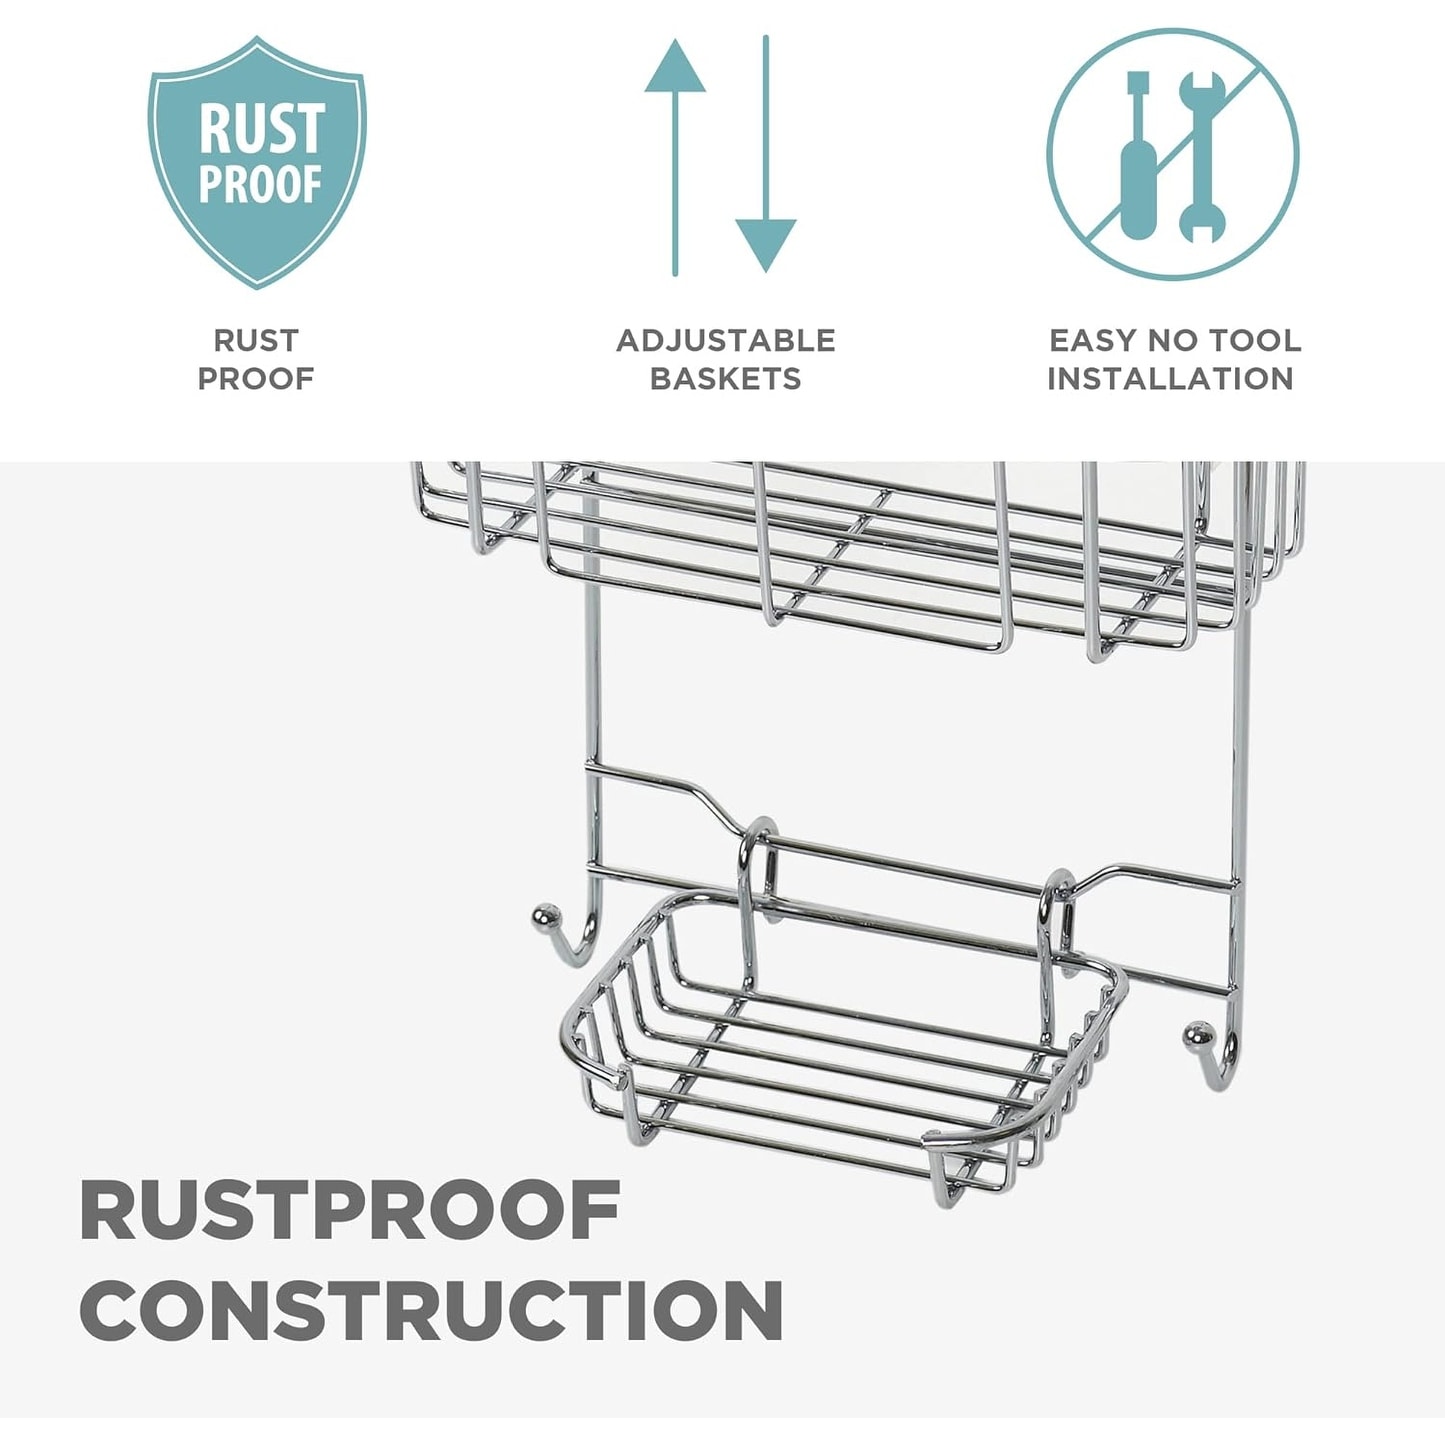 https://ak1.ostkcdn.com/images/products/is/images/direct/9b3c9d9746b6b461f6da0e8dae5c33425d3bf685/Hanging-Over-the-Door-Shower-Caddy-with-2-Storage-Baskets%2C-Soap-Dish%2C-Razor-Holders-and-Hooks.jpg